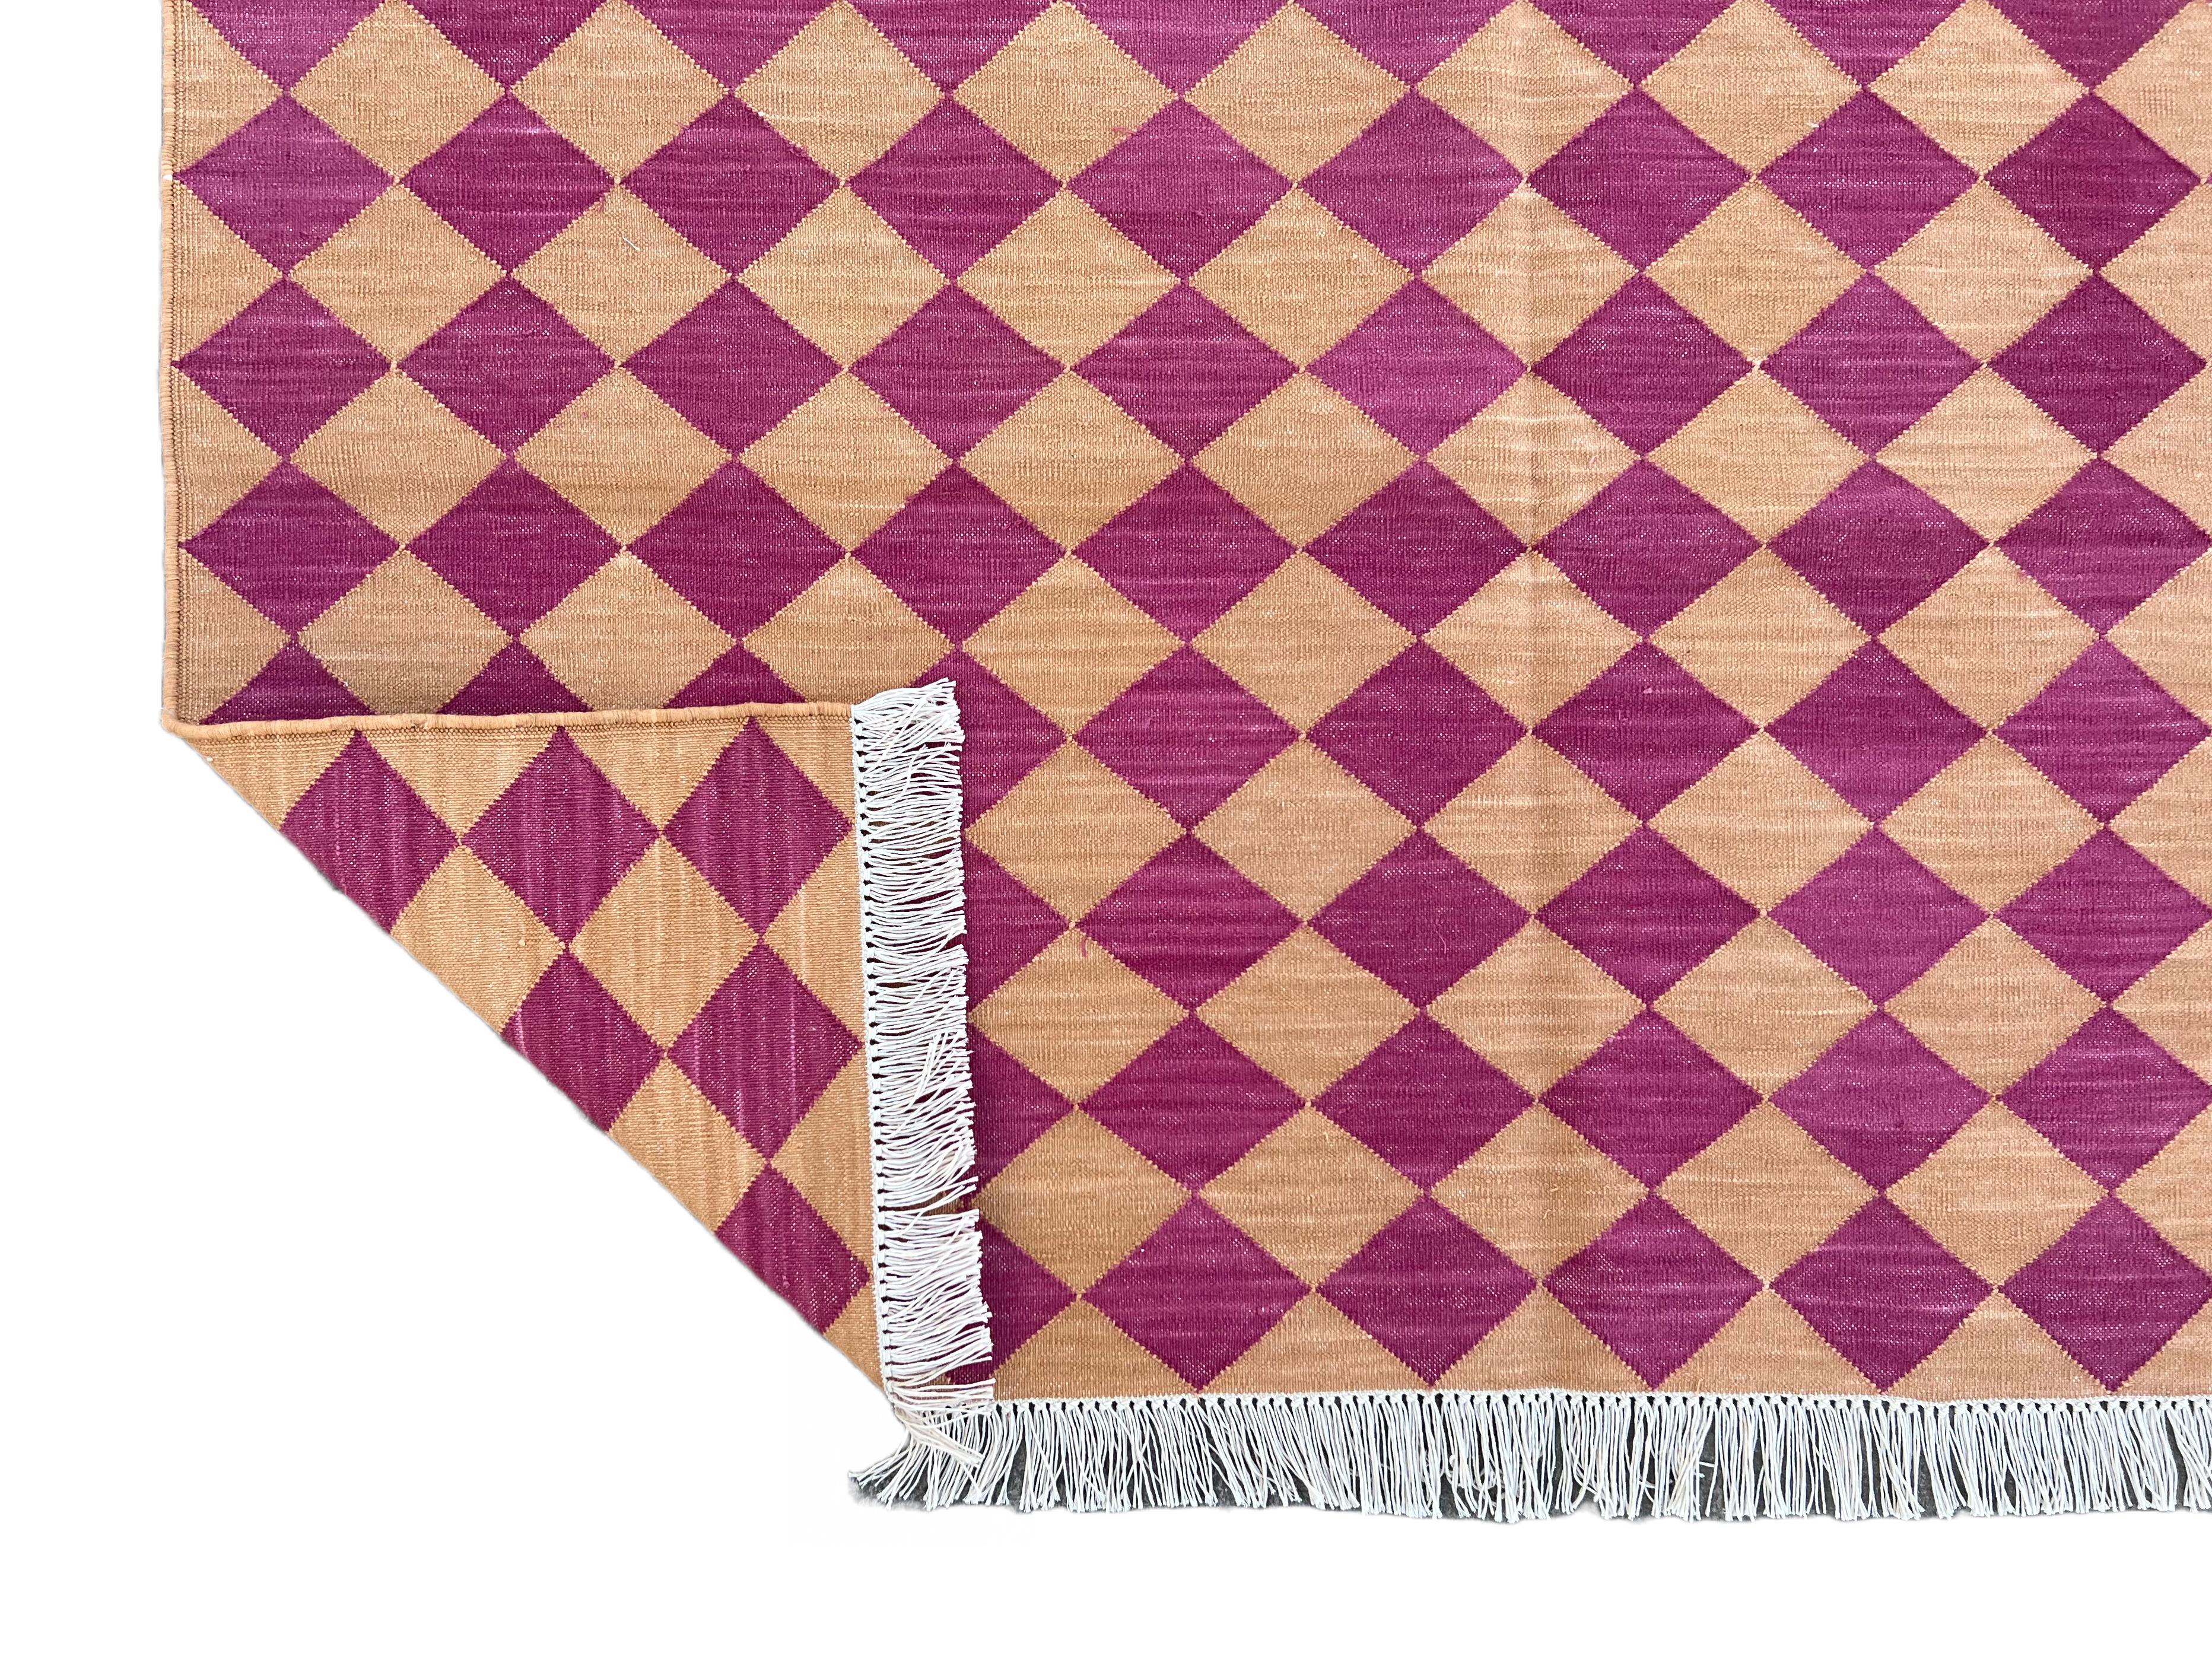 Handmade Cotton Area Flat Weave Rug, 4x6 Pink And Tan Checked Indian Dhurrie Rug For Sale 3